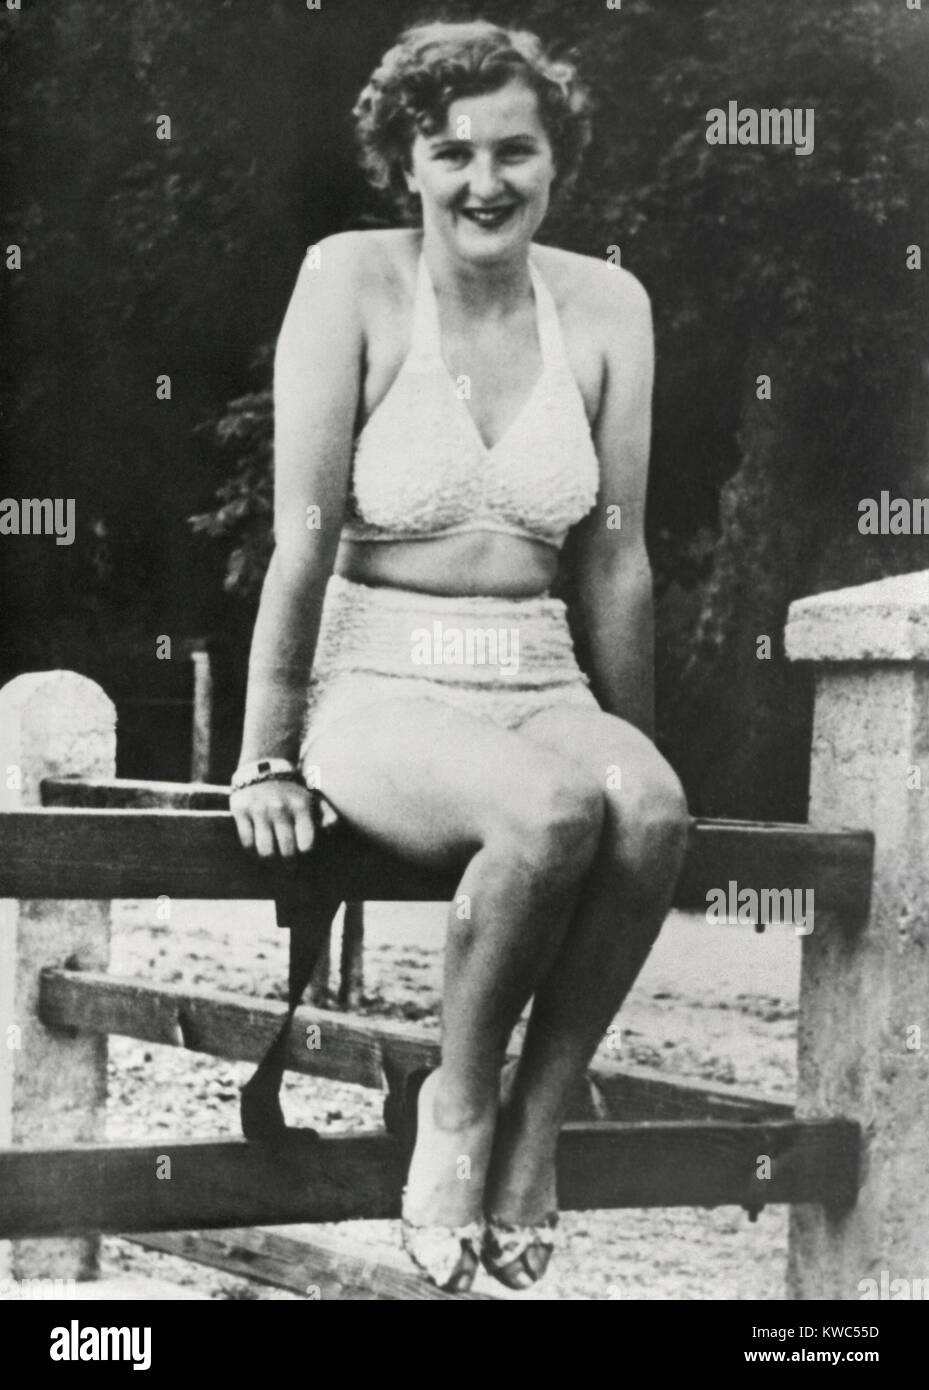 Eva Braun in a two piece bathing suit in the 1930s. Hitler arranged for Braun to work as a photographer for Heinrich Hoffmann, his personal photographer from 1933. The position enabled her to travel with Hitler's entourage, as a photographer for the Nazi Party. (BSLOC 2015 13 59) Stock Photo